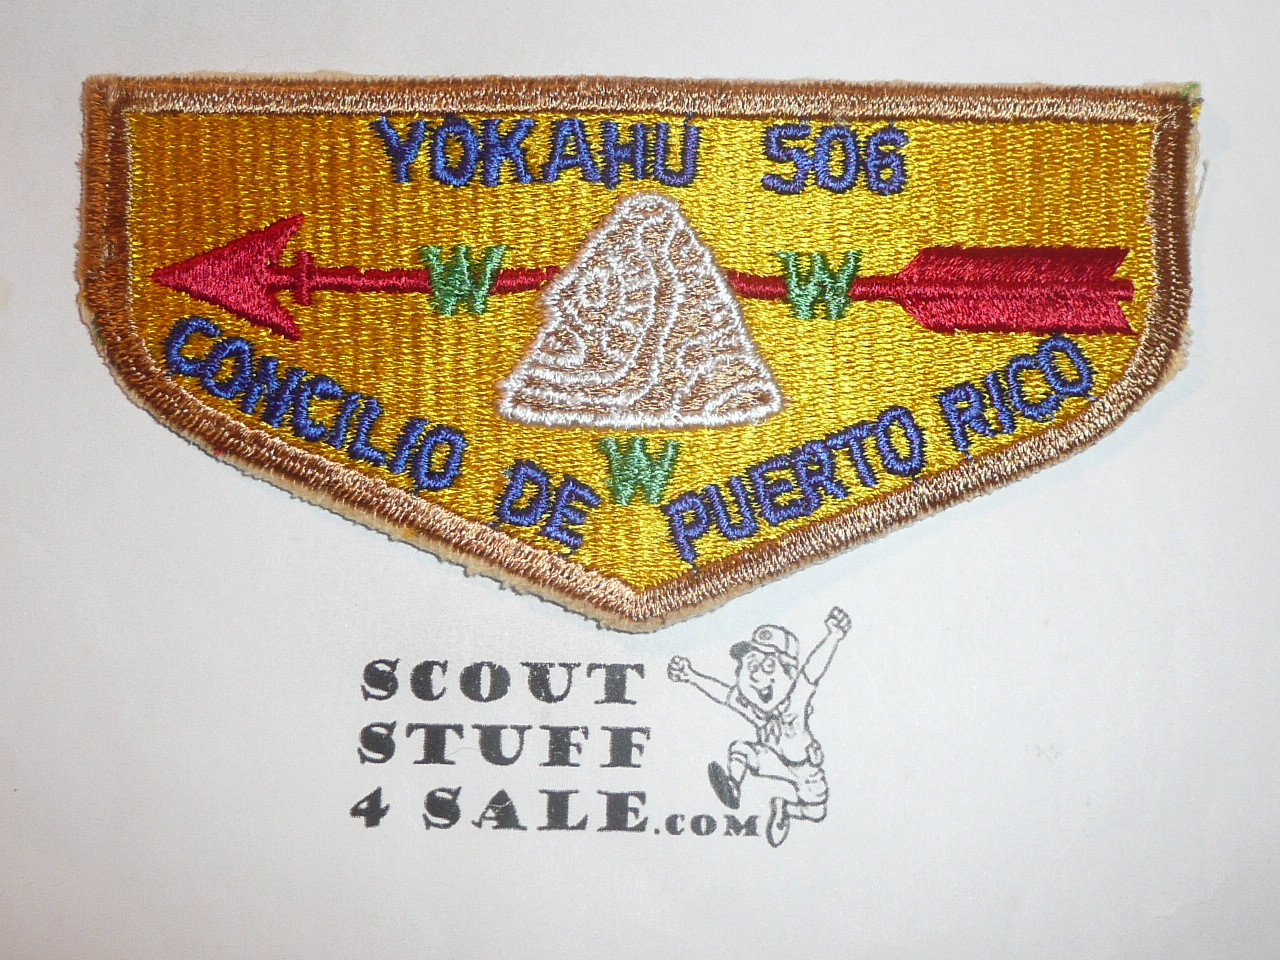 Order of the Arrow Lodge #506 Yokahu s2 Flap Patch